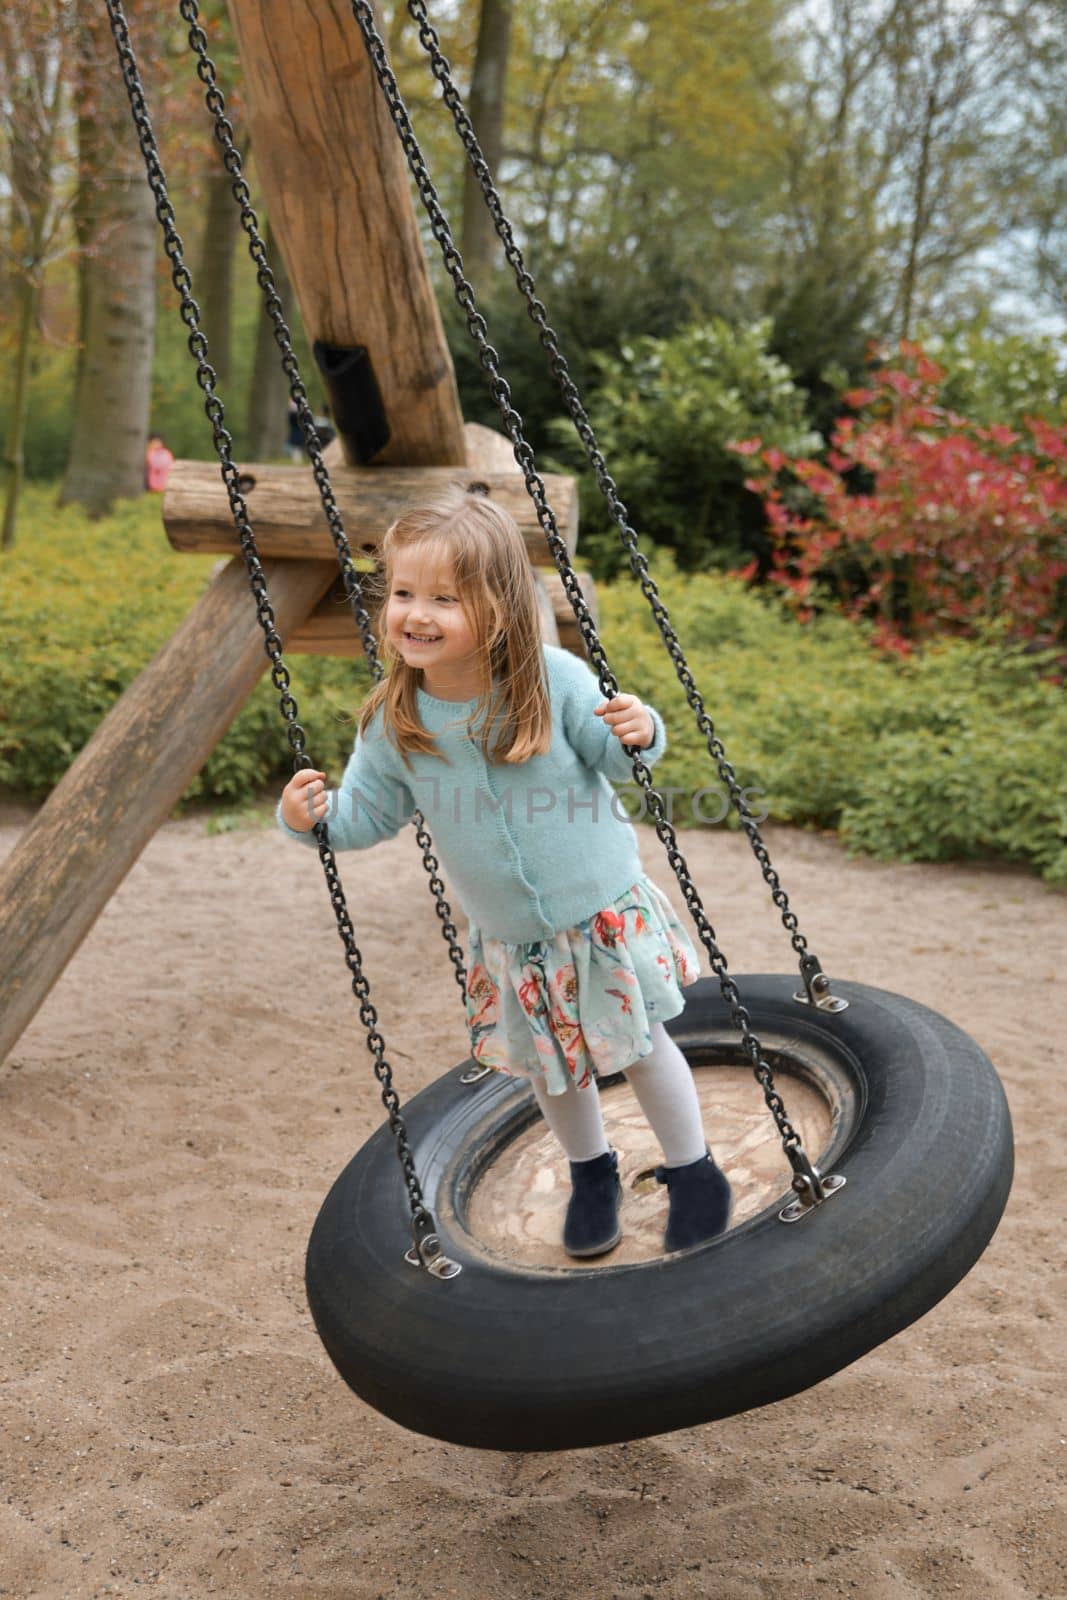 Girl of 4 years old riding on a swing in a park